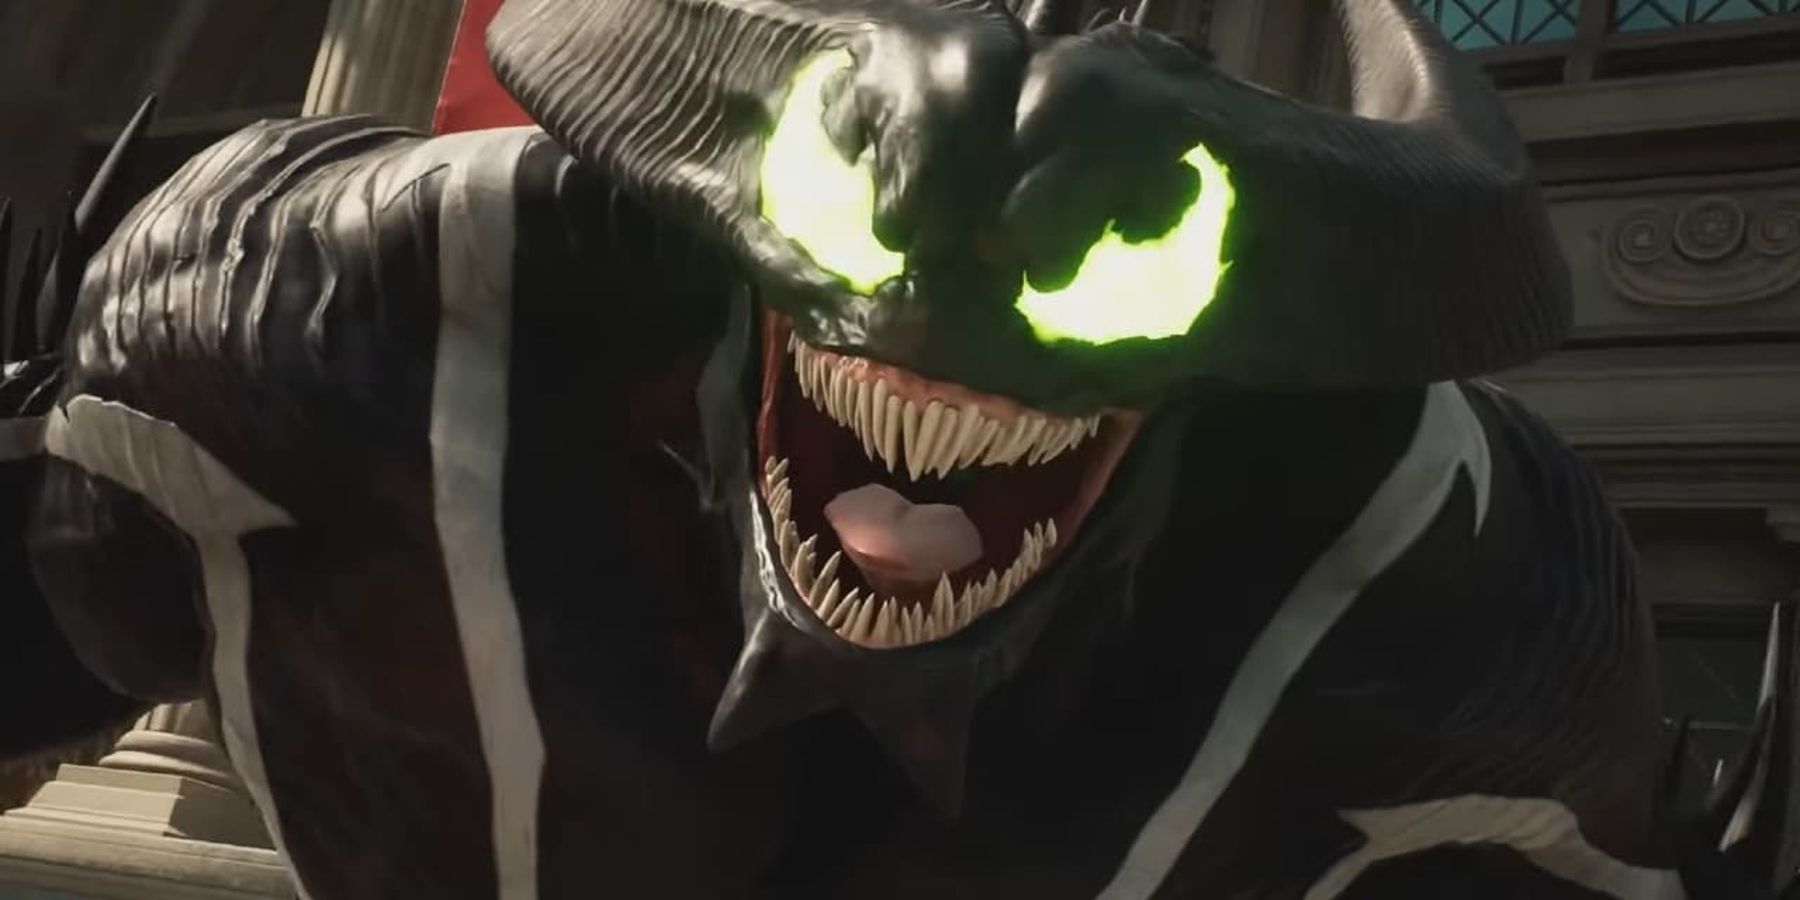 Redemption - Venom DLC Now Available for Marvel's Midnight Suns